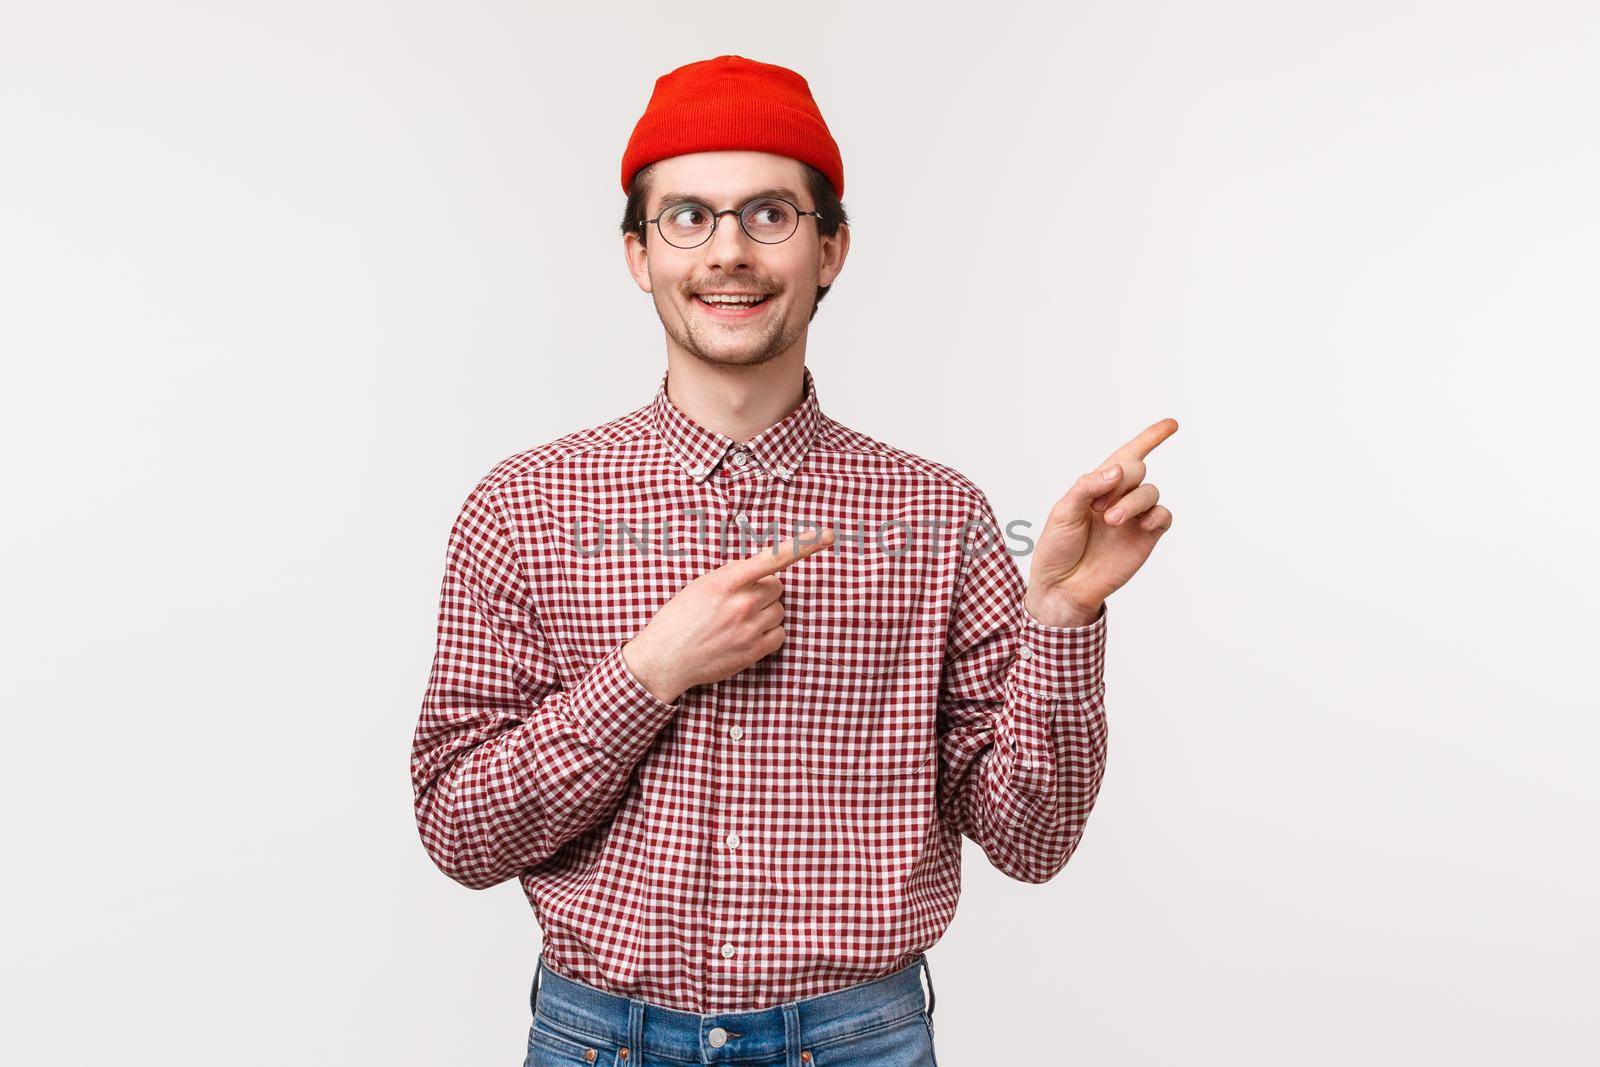 Waist-up portrait of curious excite geeky adult man in red beanie, checked shirt, pointing and looking upper right corner with intrigued enthusiastic smile, foundsomething interesting.